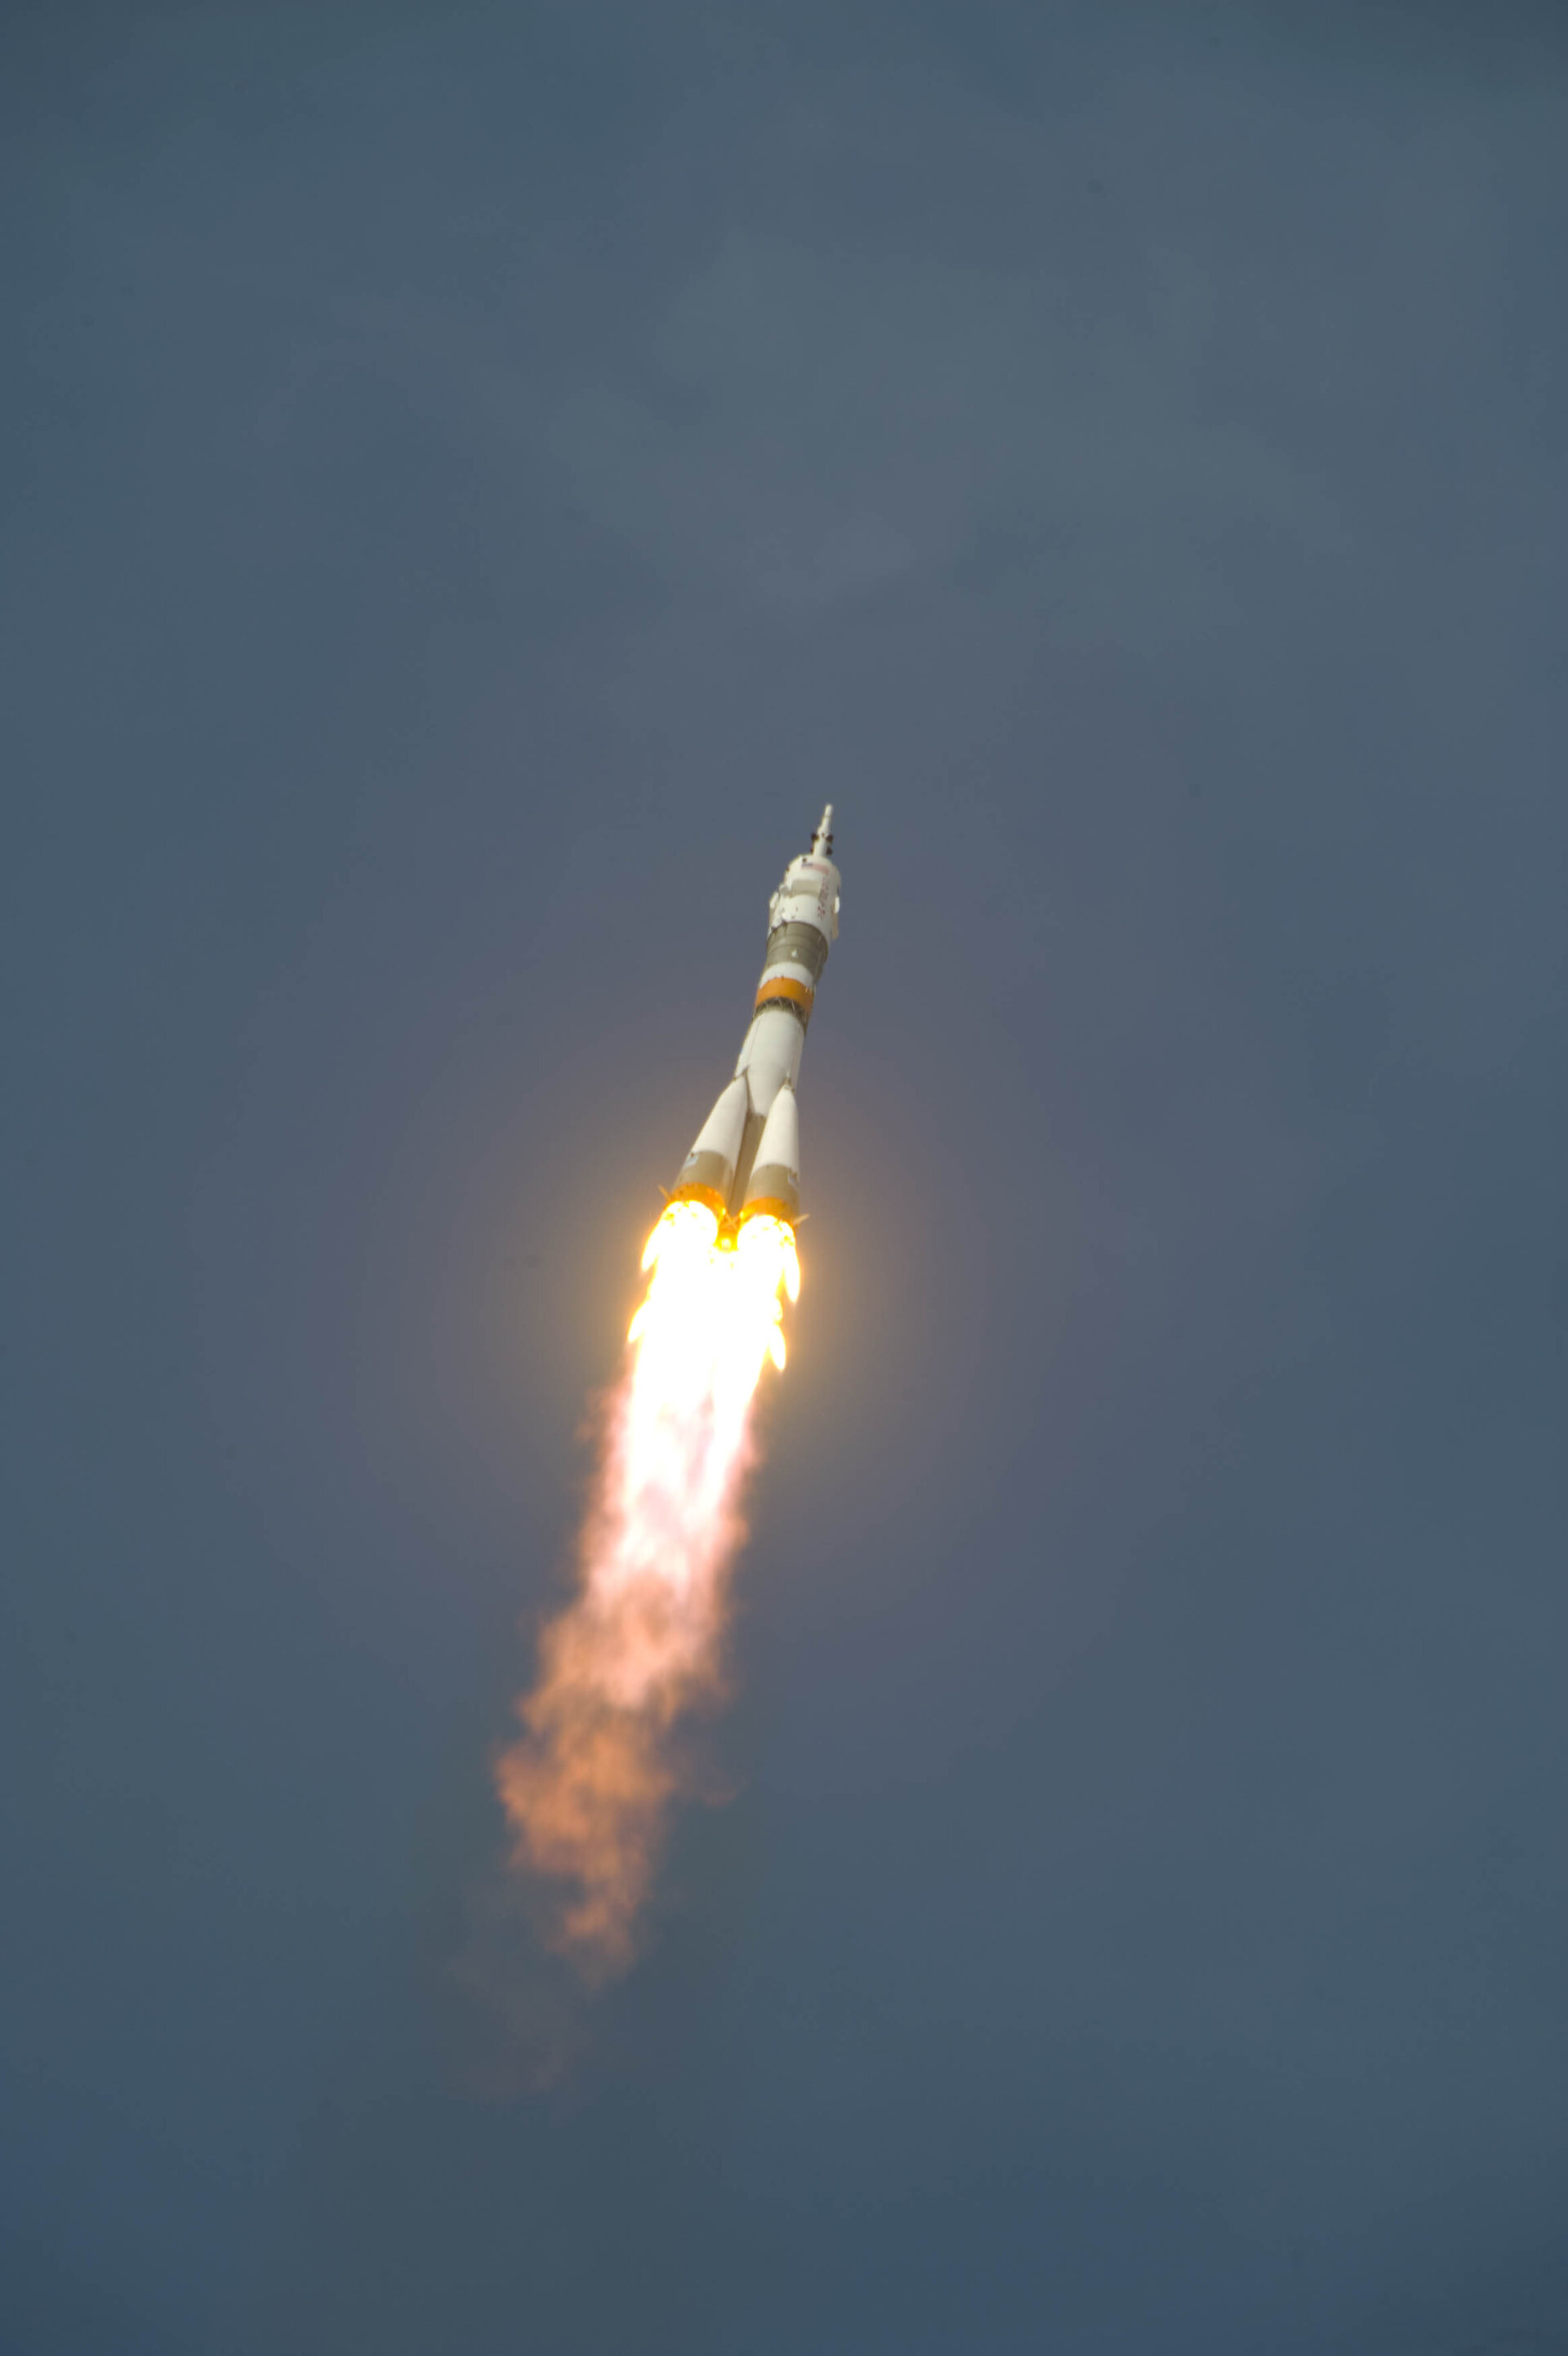 The Soyuz TMA-15 launches from the Baikonur Cosmodrome in Kazakhstan at 12:34 CEST on 27 May 2009